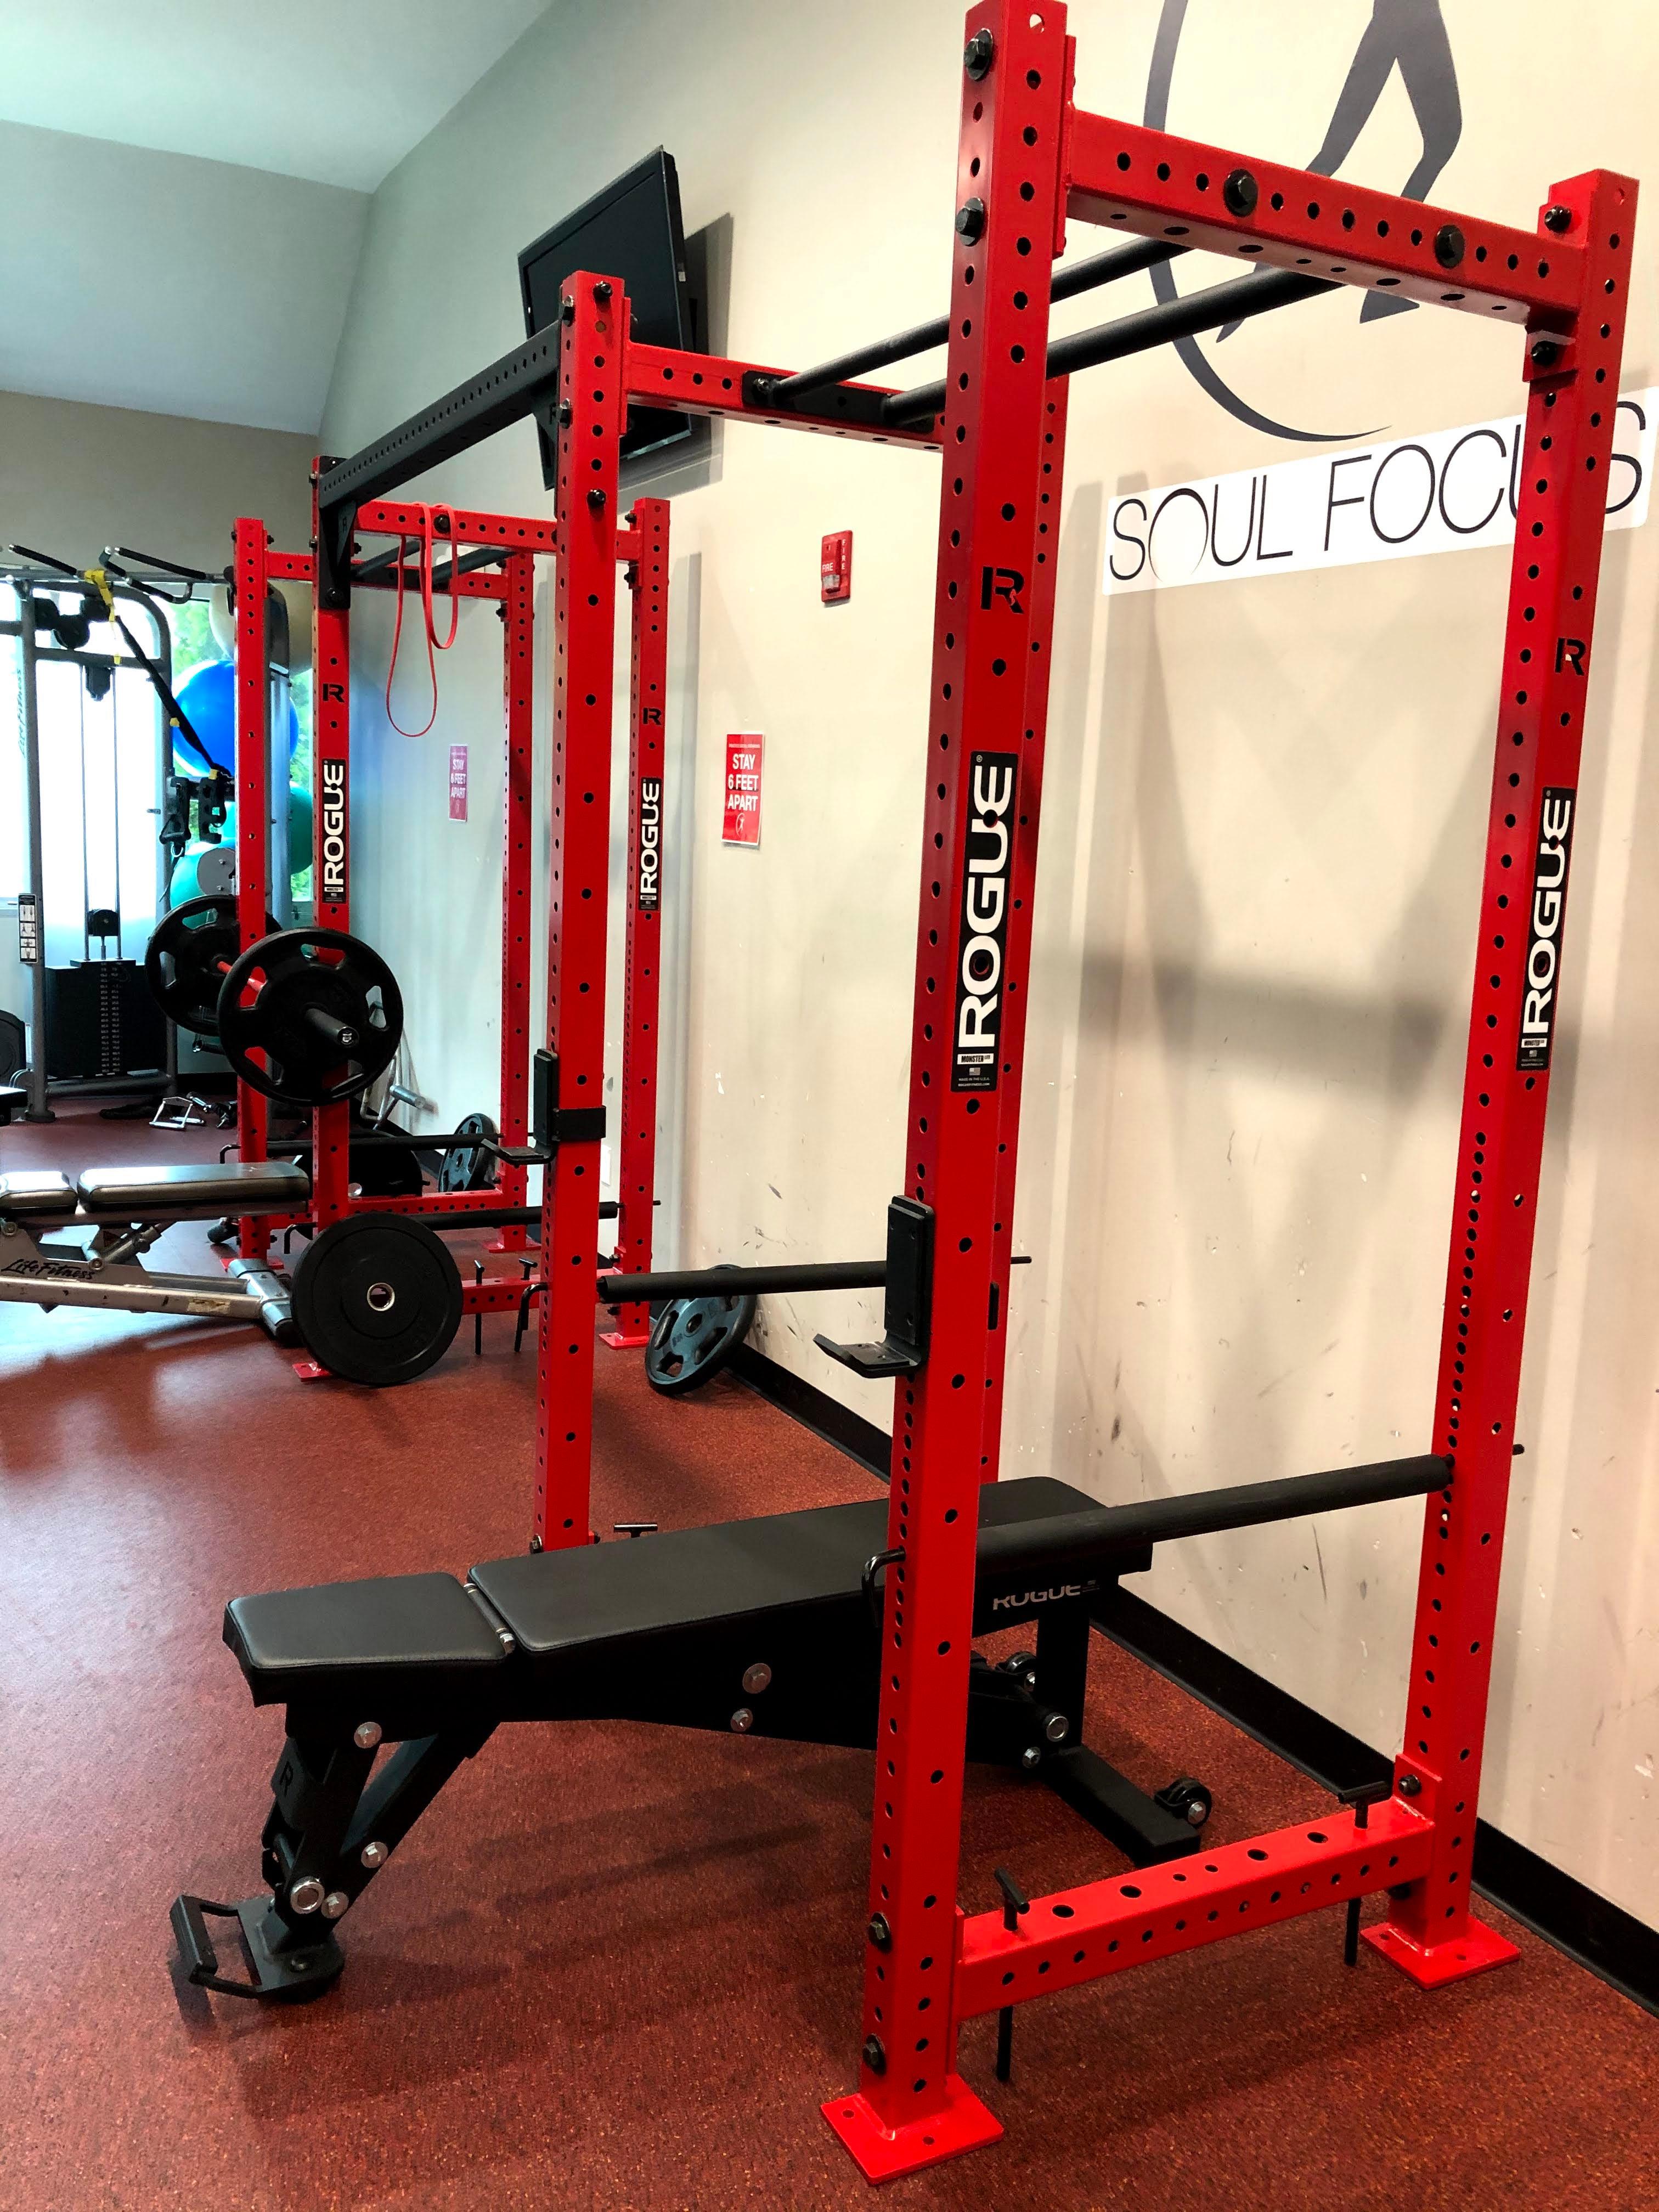 FITNESS CENTER & SPA EQUIPMENT TO BE SOLD AT  ABSOLUTE AUCTION!